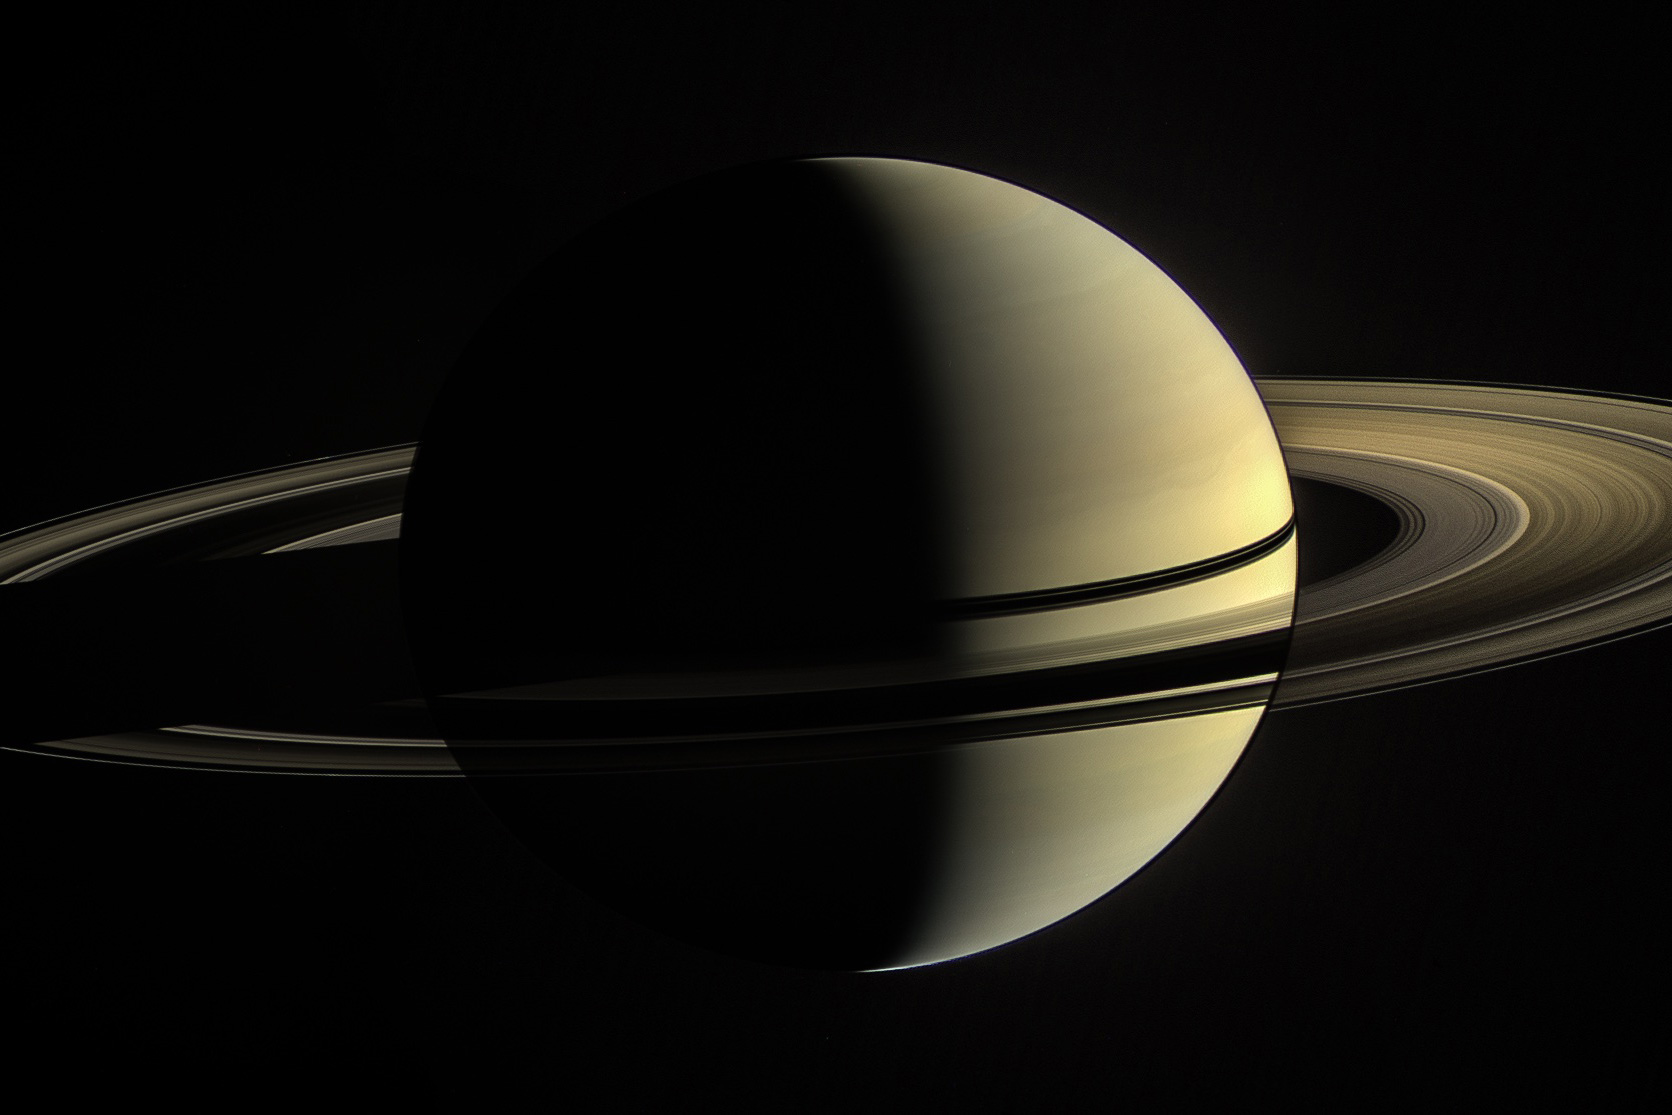 Saturn's rings and tilt could be the product of an ancient ...